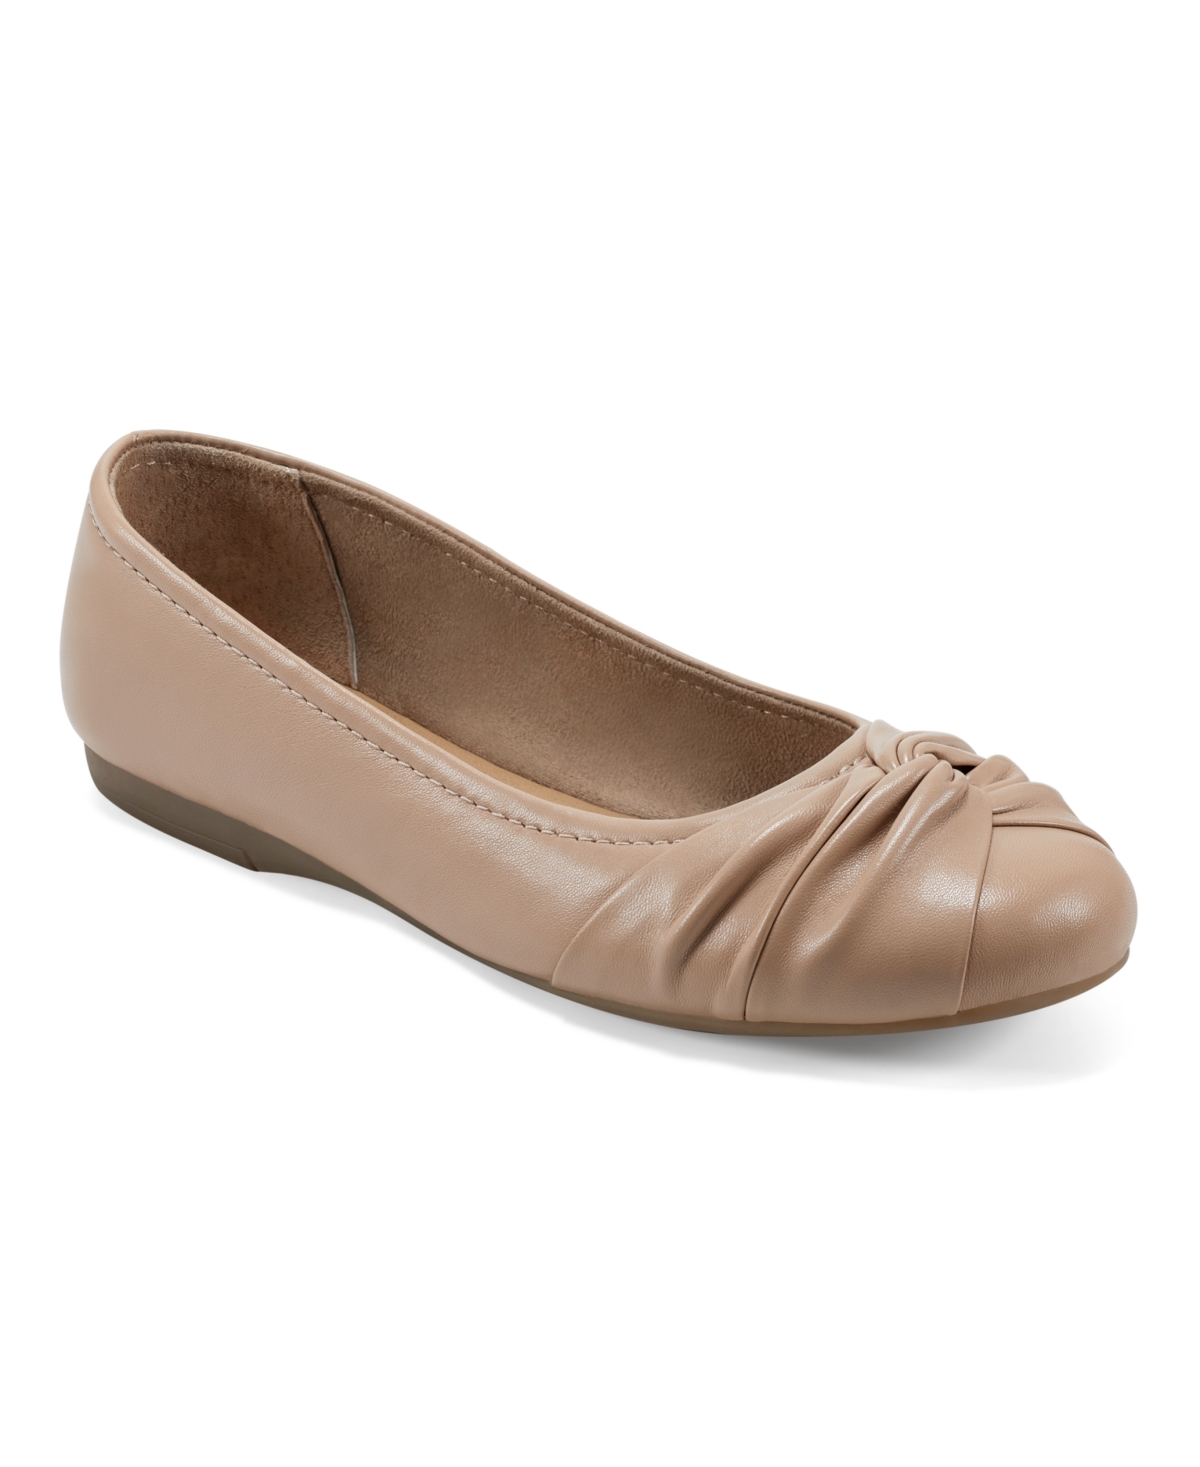 Shop Earth Women's Jacci Lightweight Round Toe Slip-on Dress Flats In Medium Natural Leather